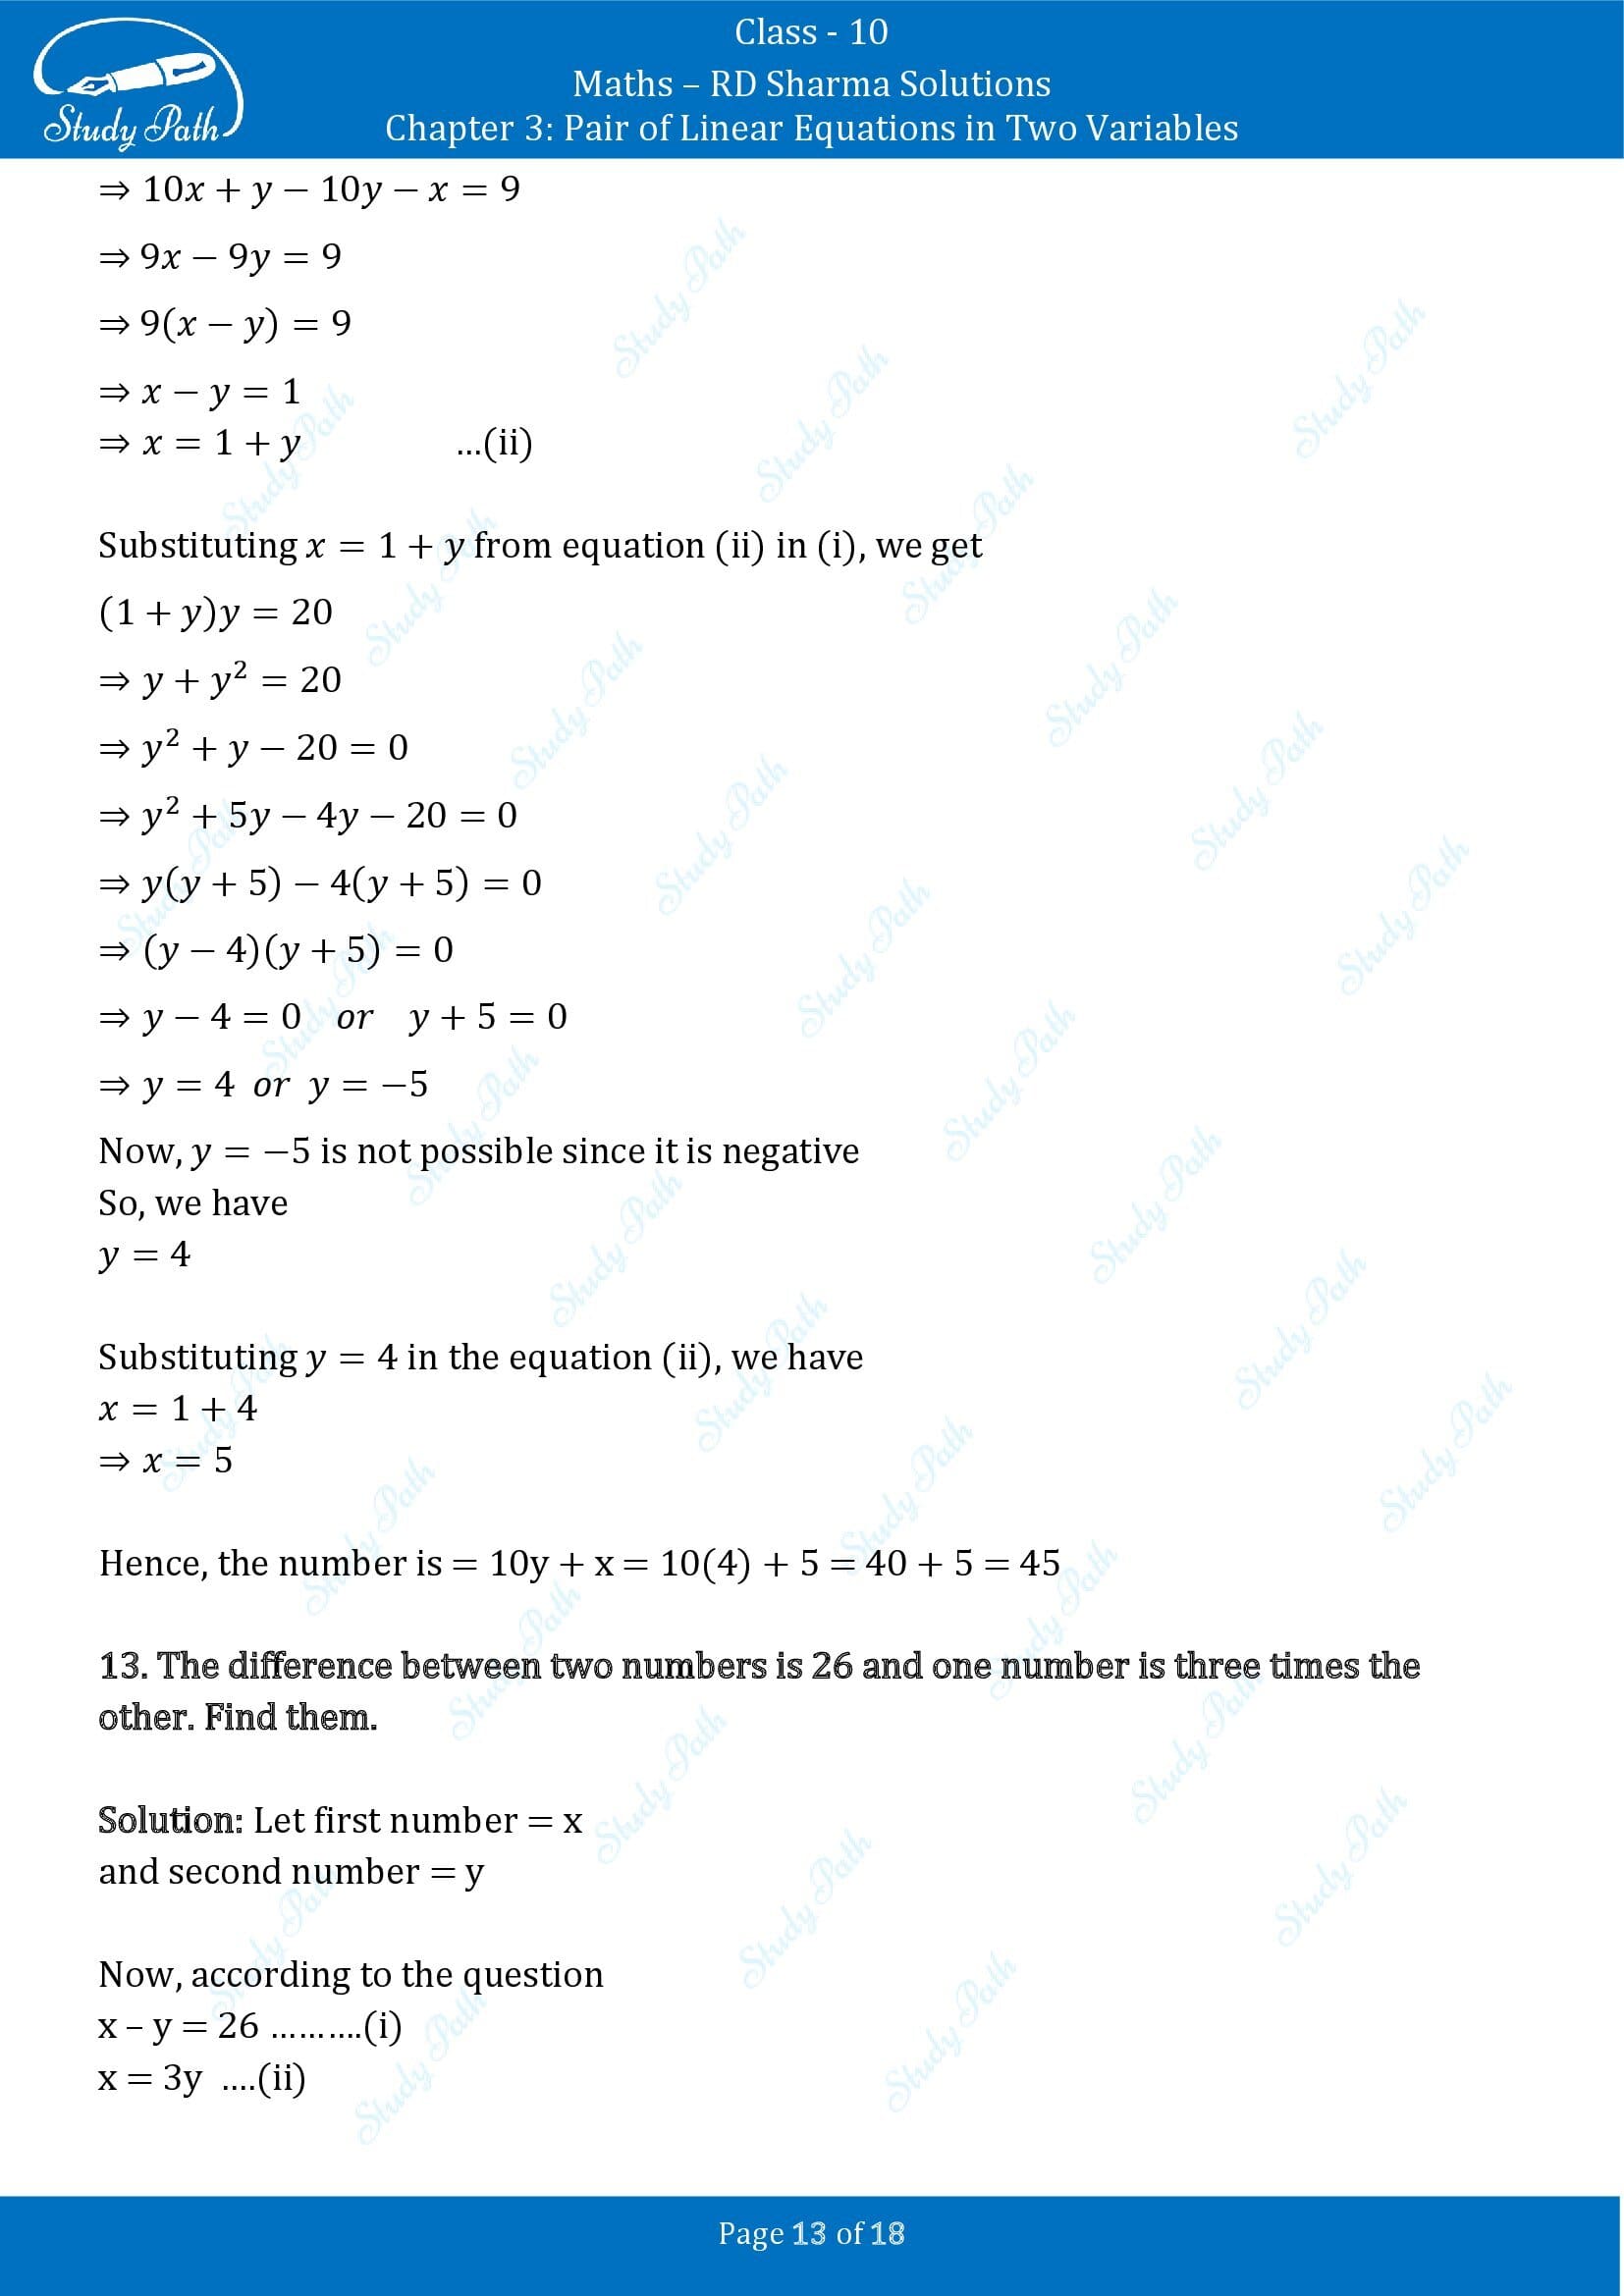 RD Sharma Solutions Class 10 Chapter 3 Pair of Linear Equations in Two Variables Exercise 3.7 00013